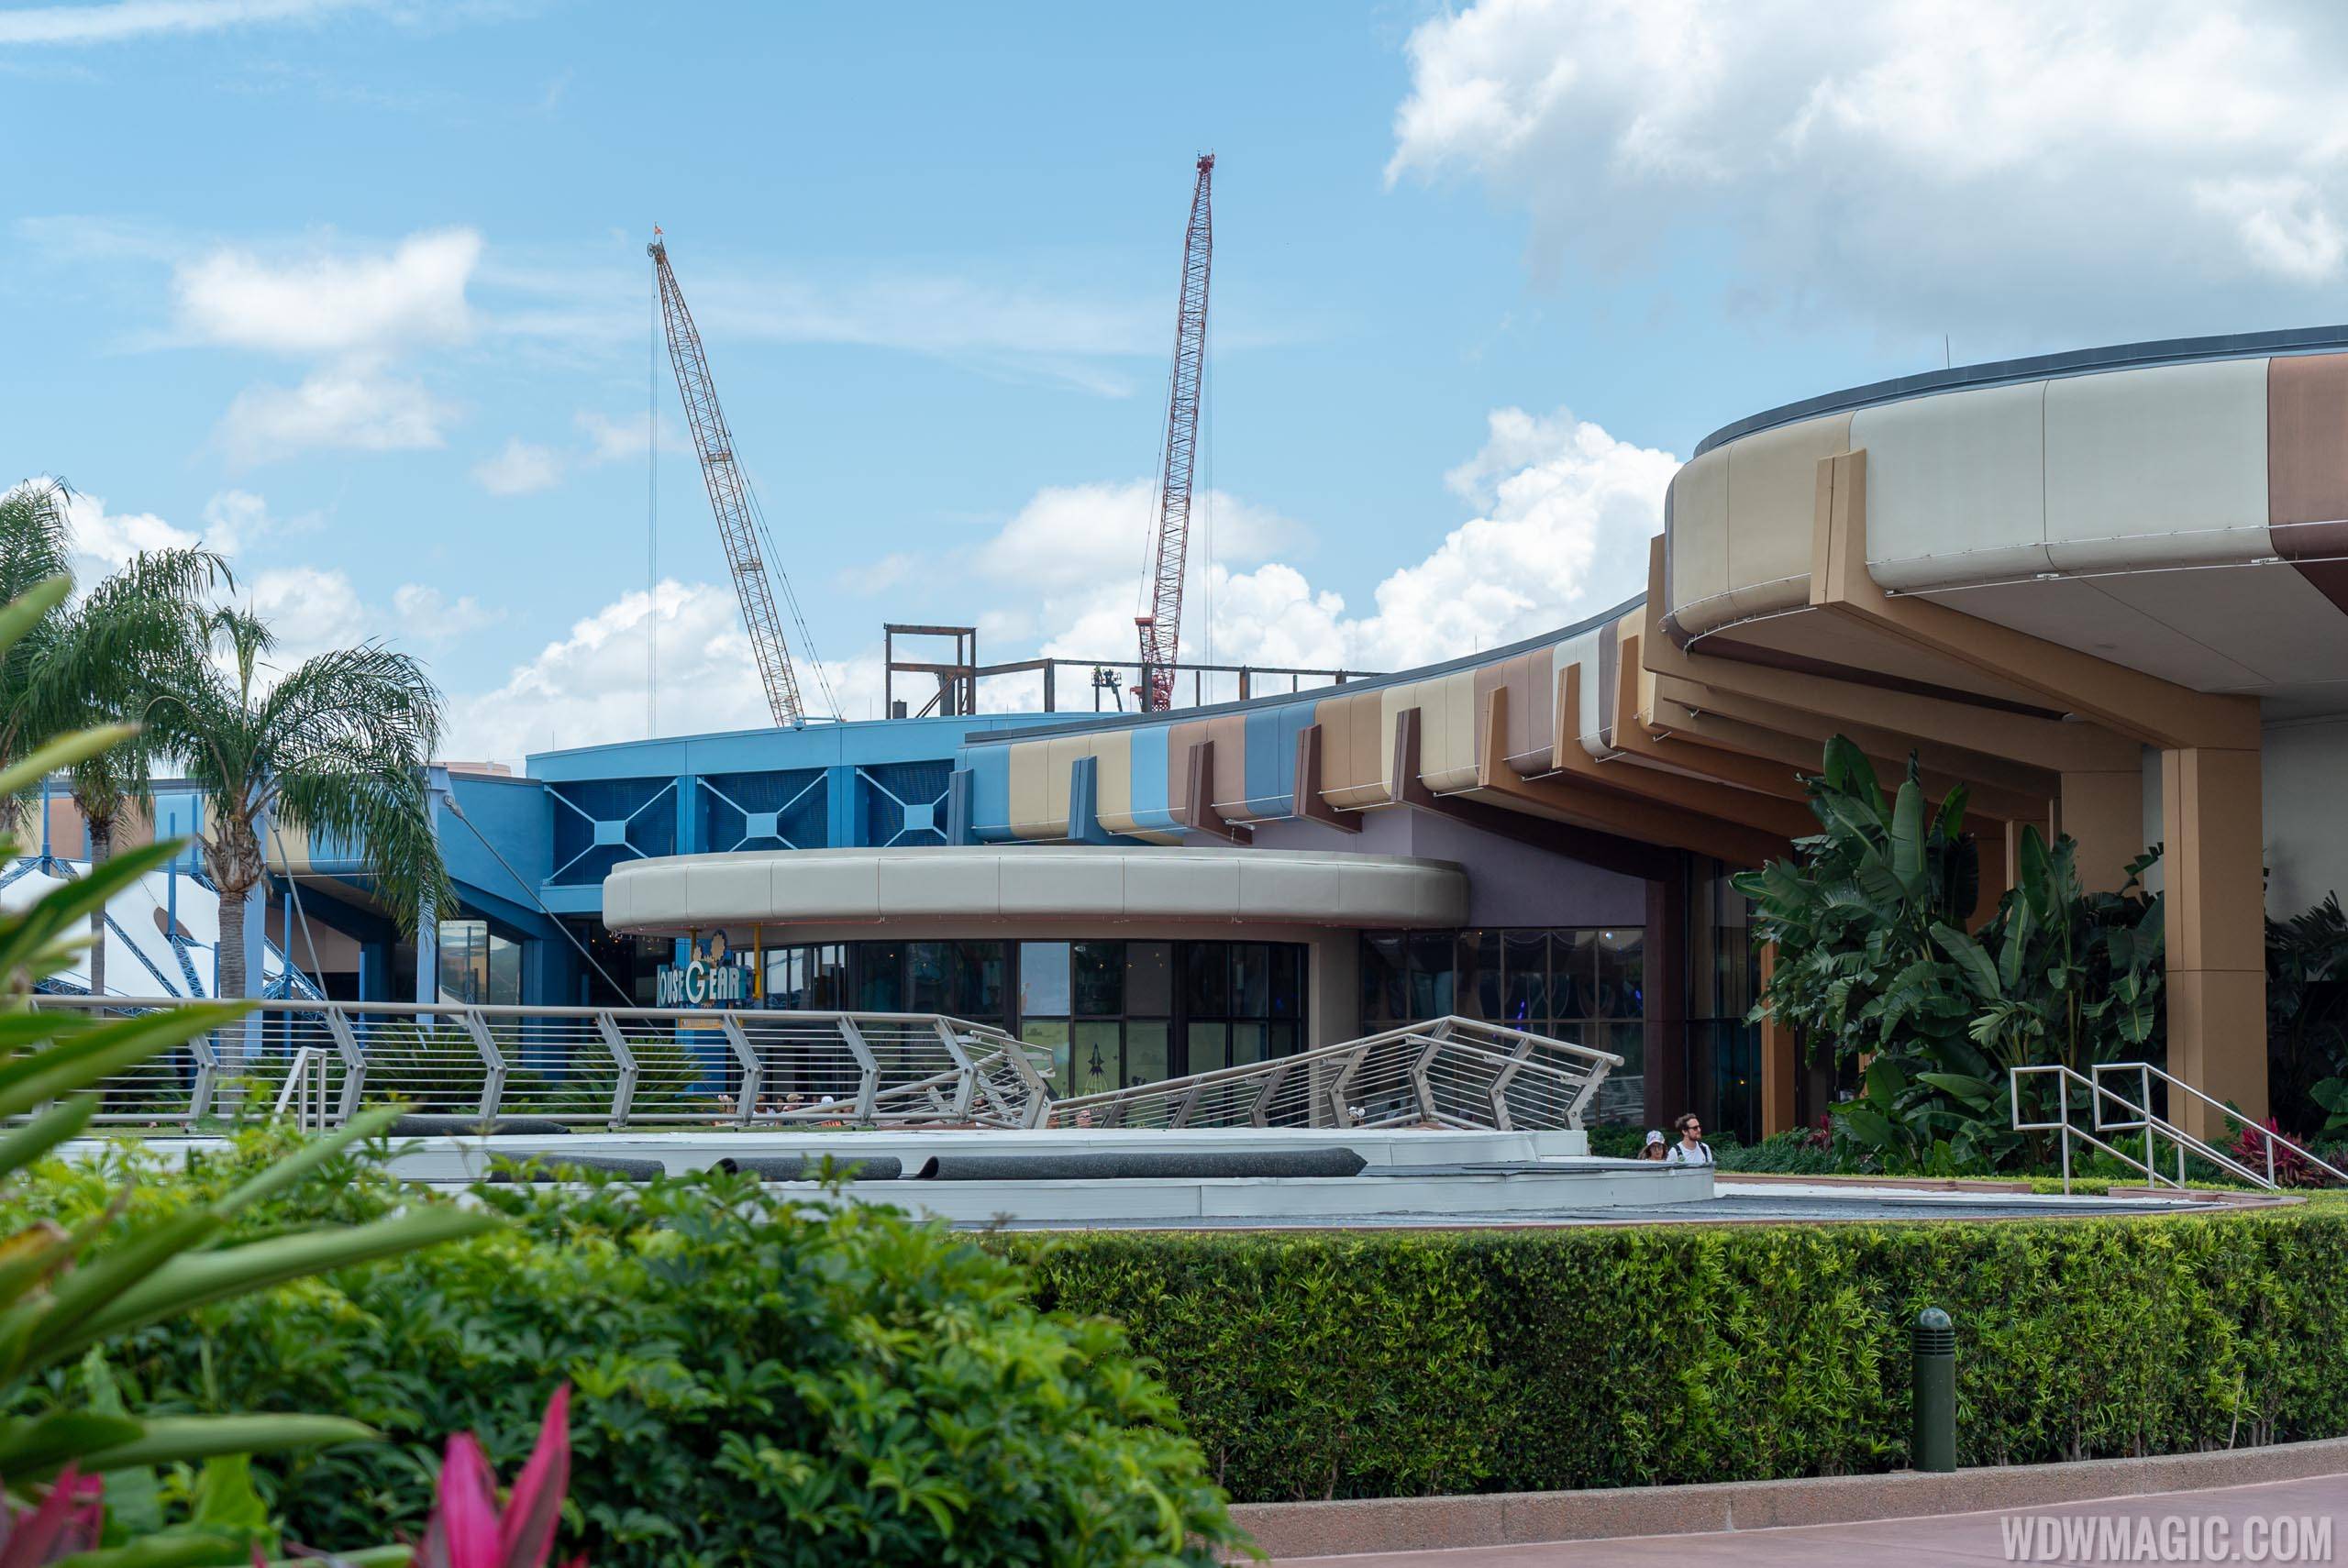 Guardians of the Galaxy viewed from Future World area